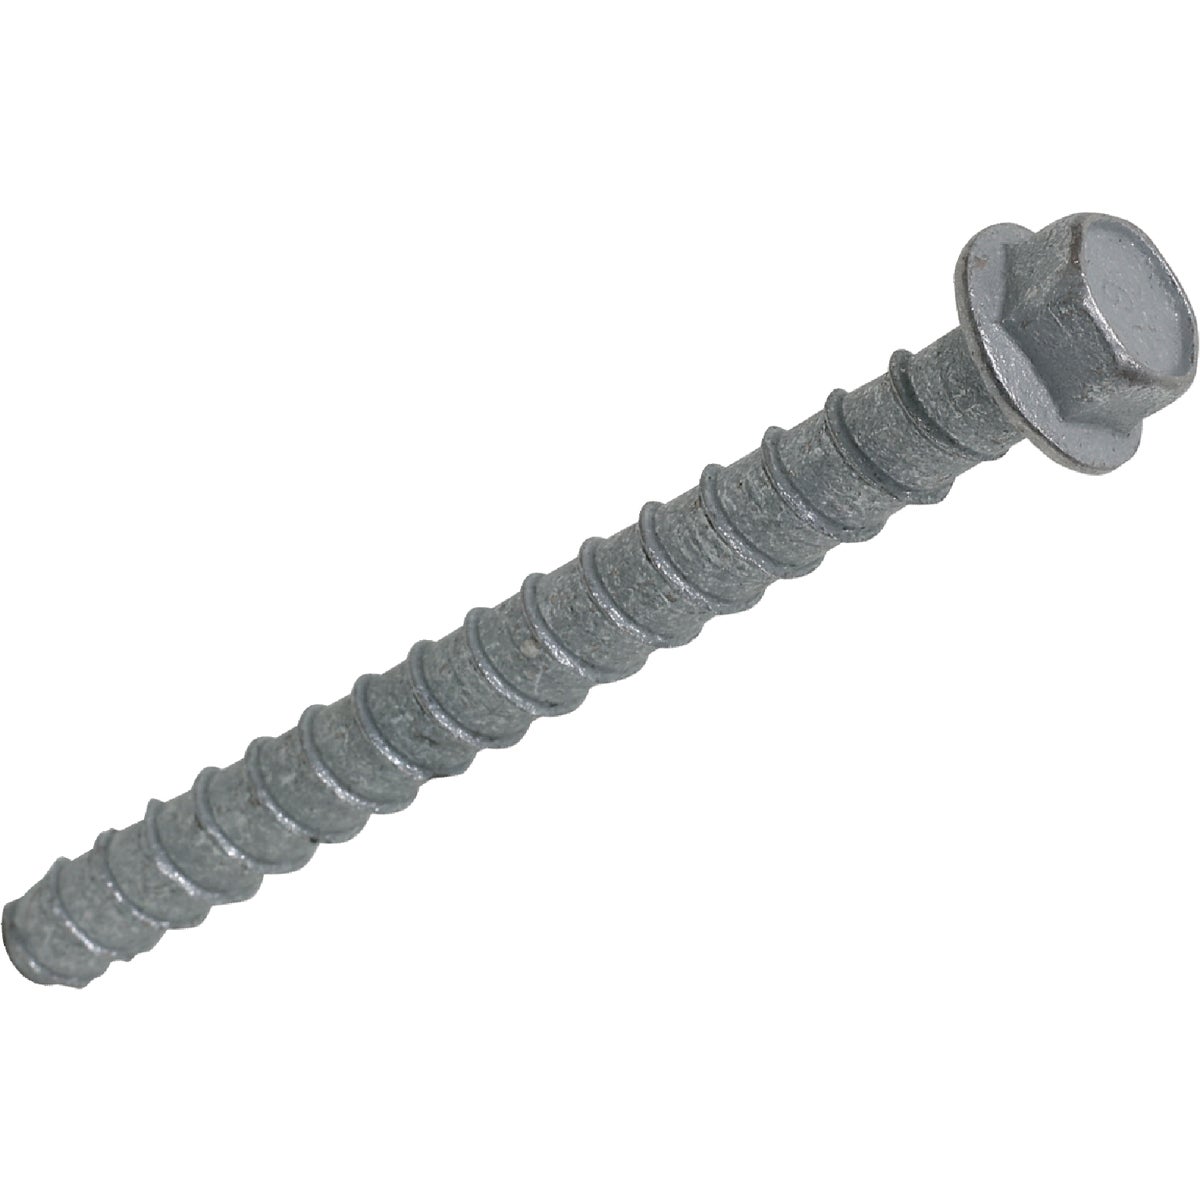 Item 702052, The Simpson Strong-Tie Titen HD heavy-duty screw anchor is a mechanically 